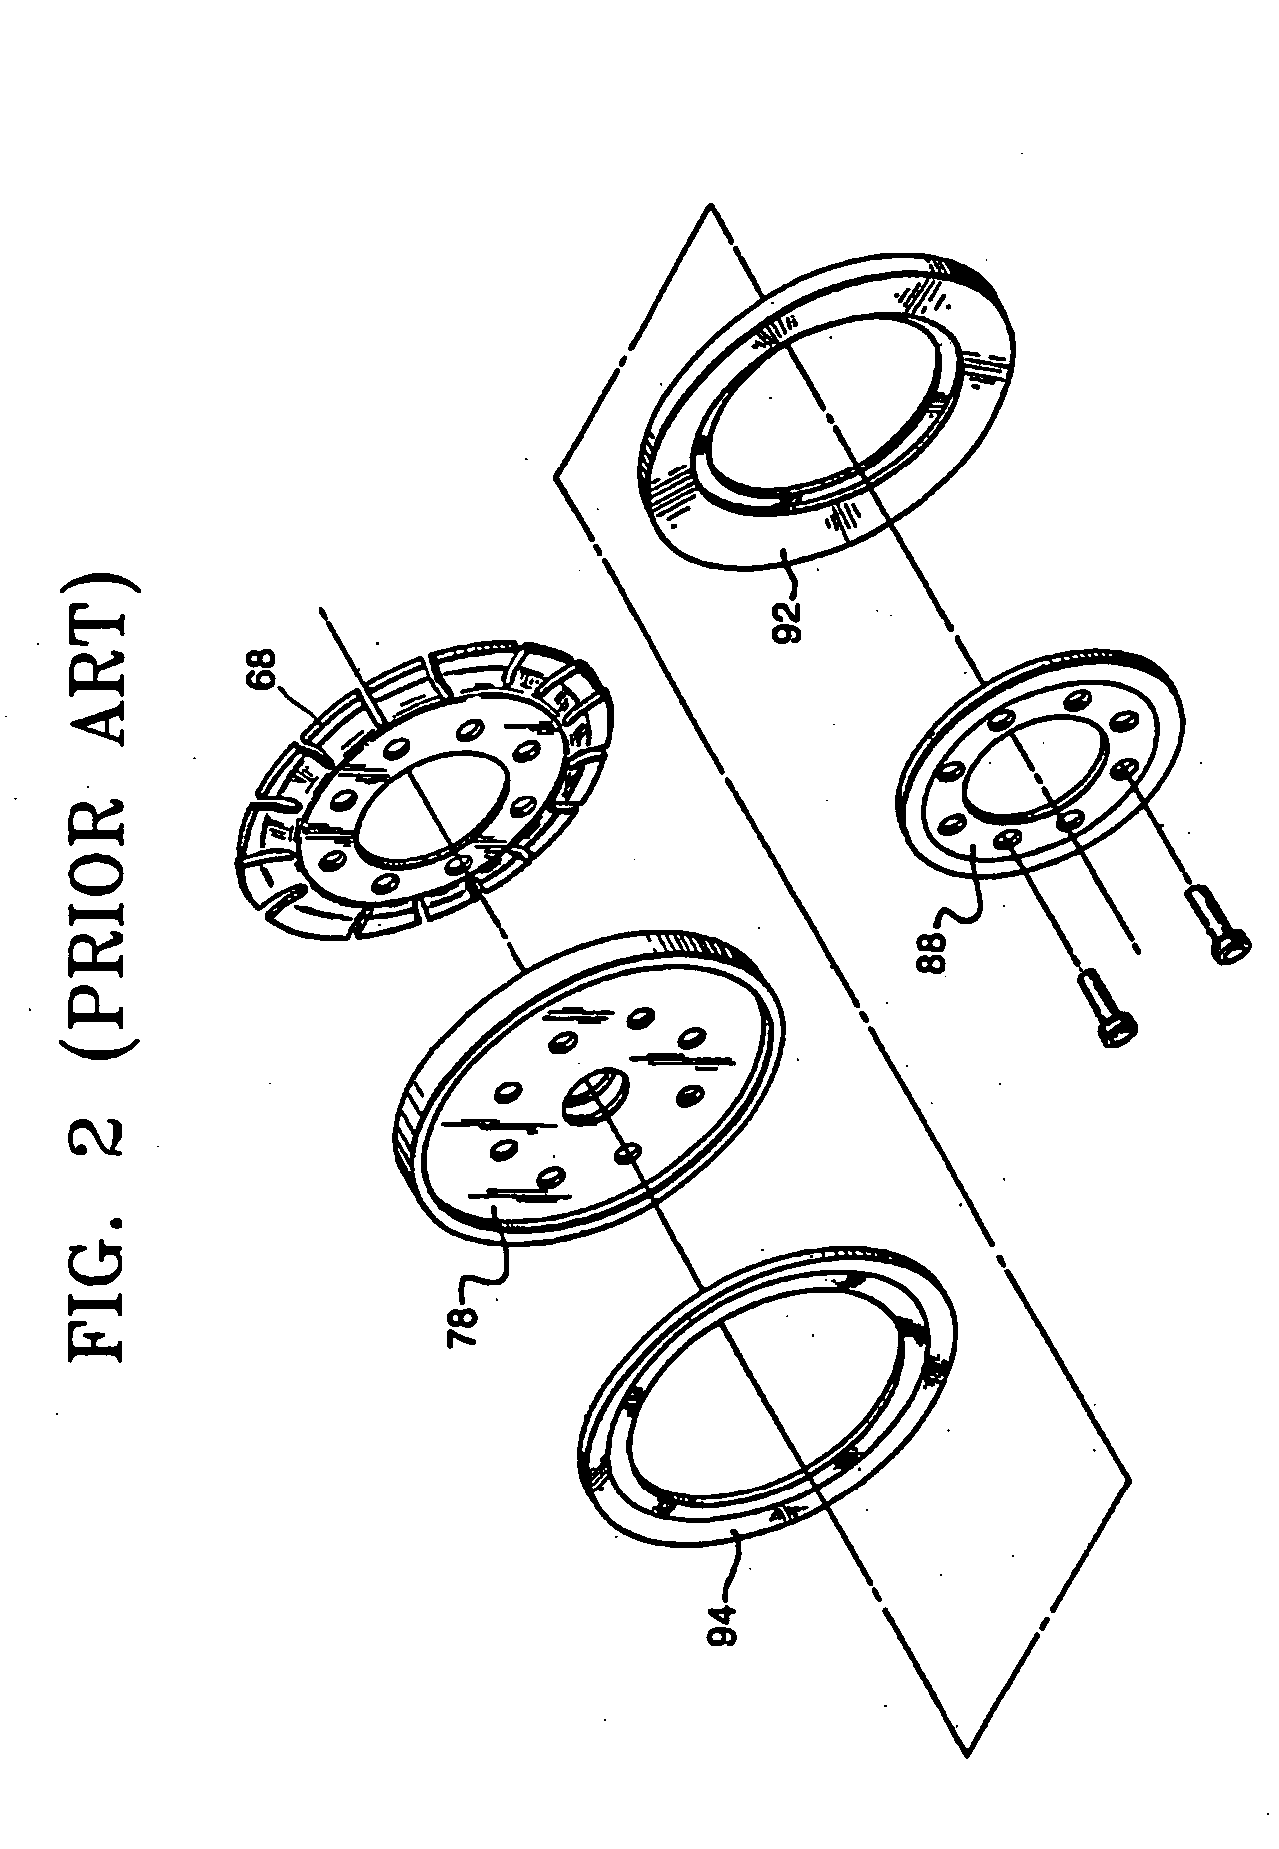 Gas turbine engine with seal assembly